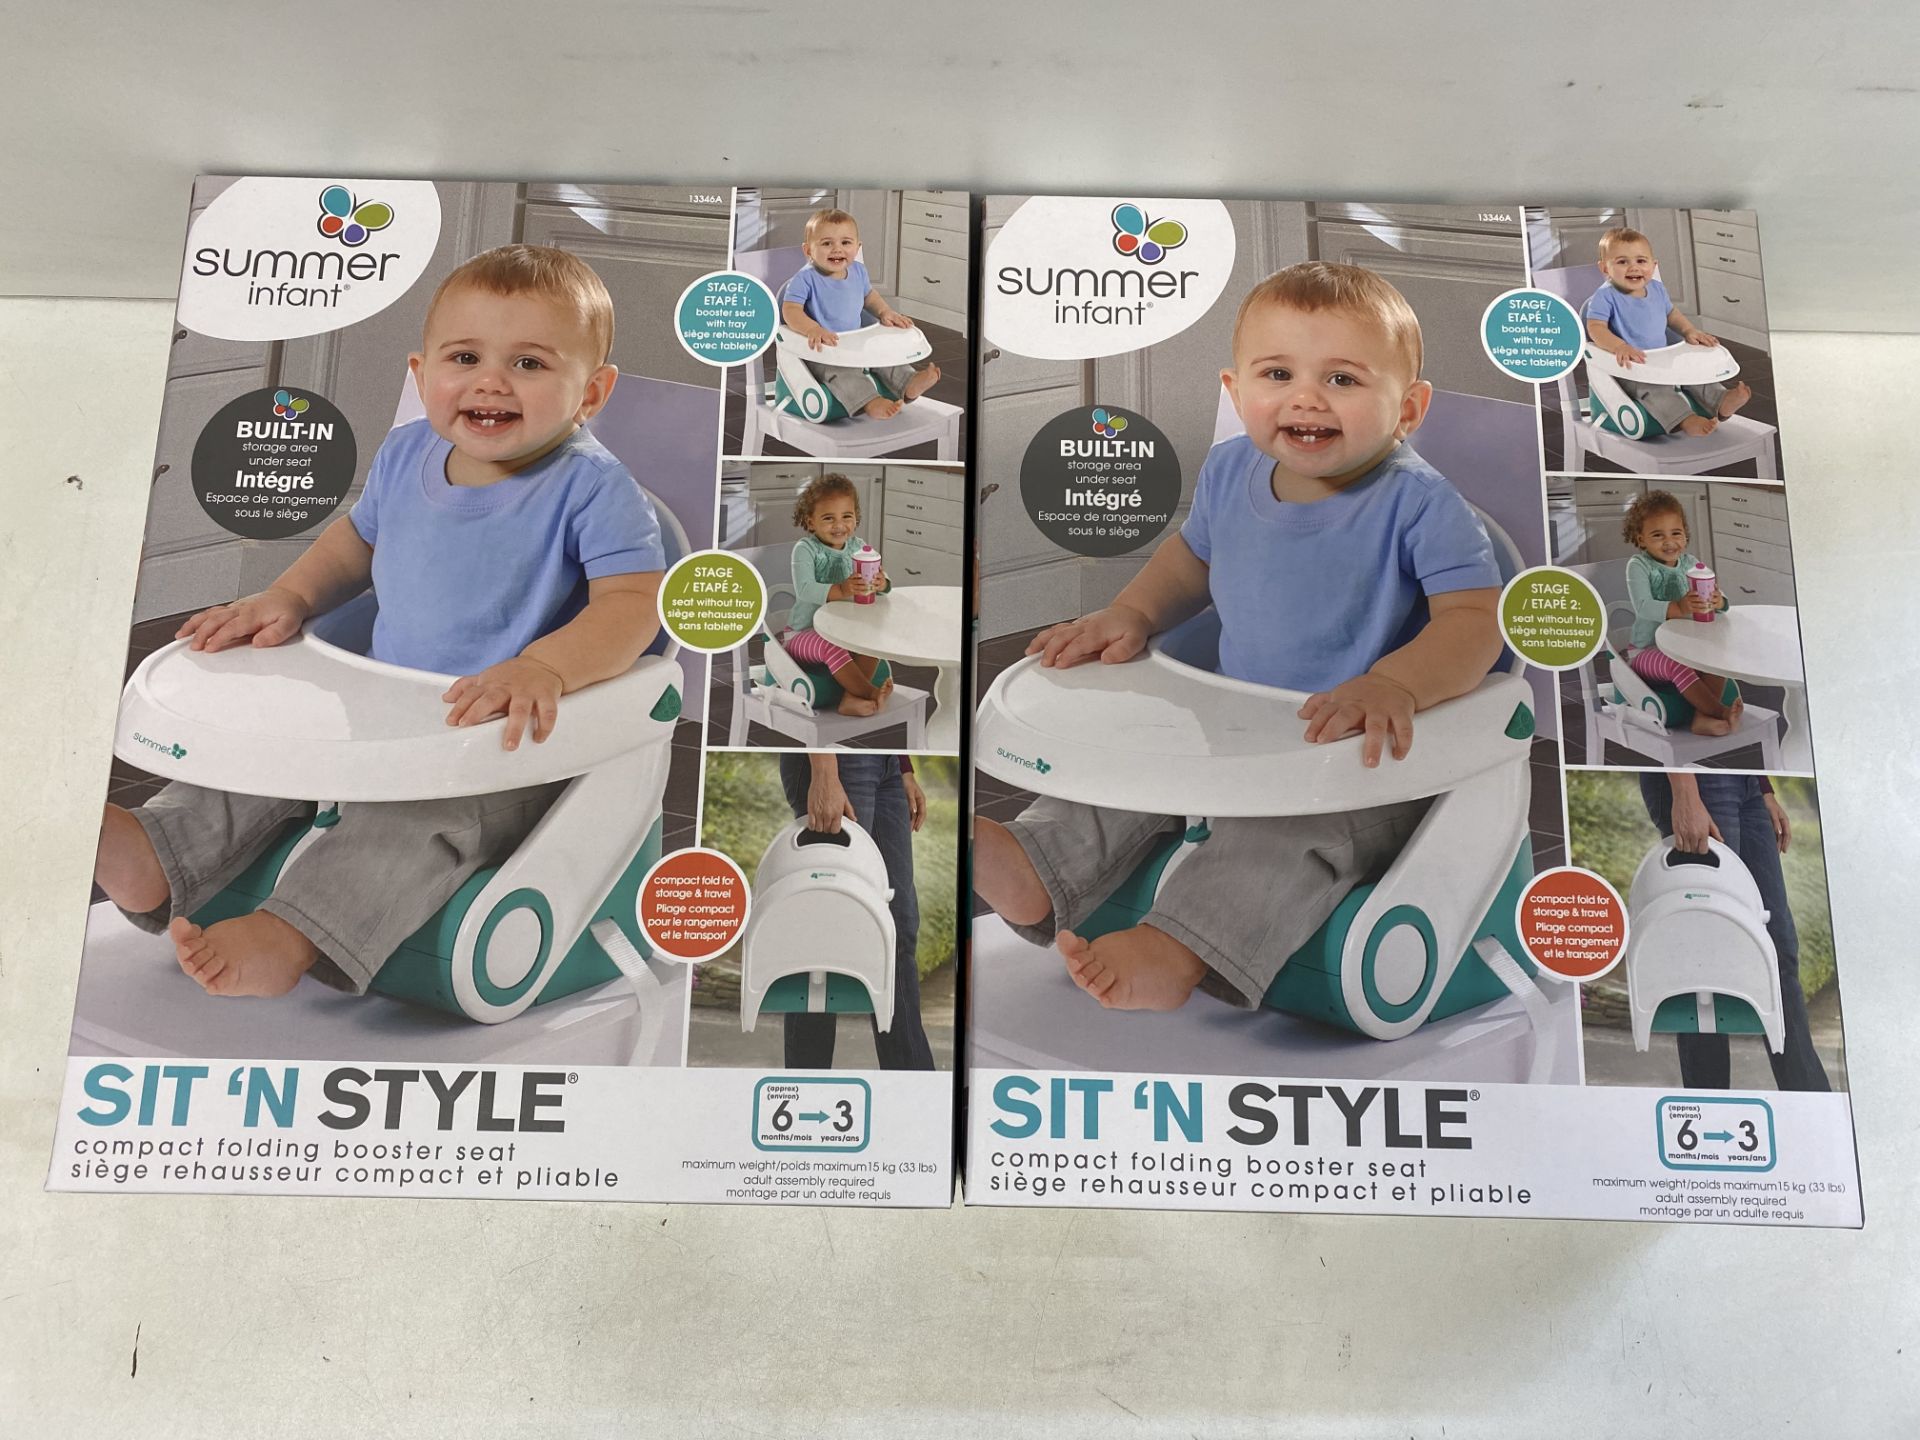 2 x Summer Infant Sit n' Style Compact Folding Booster Seats